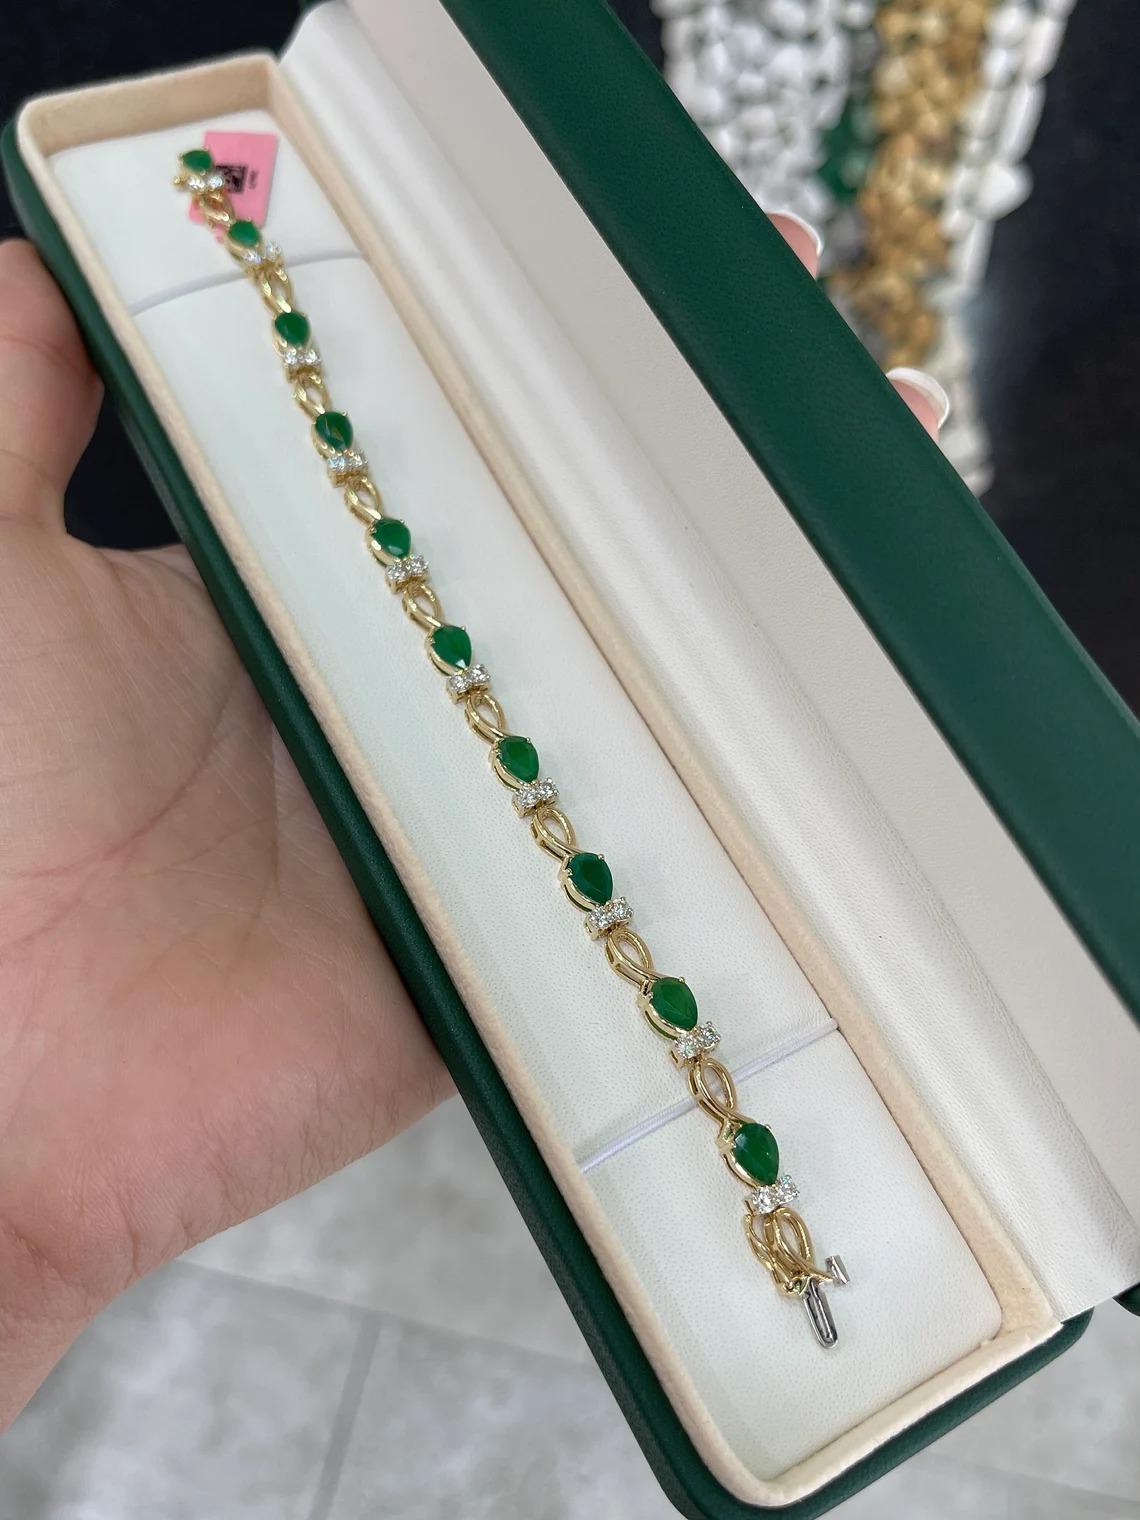 A stunning emerald and diamond accent bracelet. This exceptional piece features almost six carats of lush alpine dark green emeralds cut into the shape of a pear and showcases good luster as well as clarity. Two sparkly white brilliant round cut